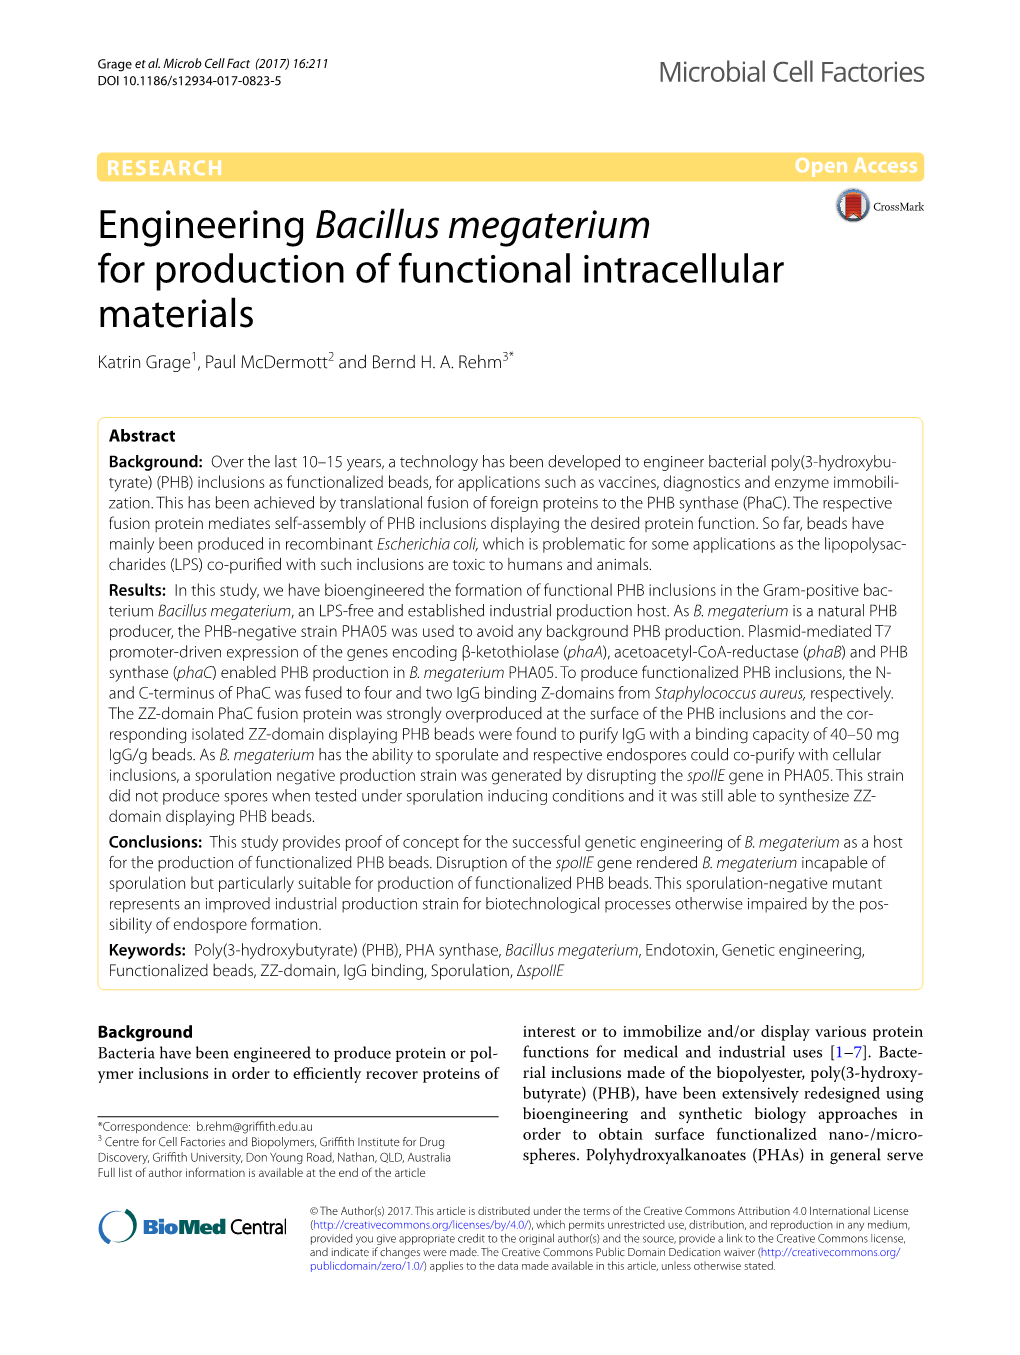 Engineering Bacillus Megaterium for Production of Functional Intracellular Materials Katrin Grage1, Paul Mcdermott2 and Bernd H